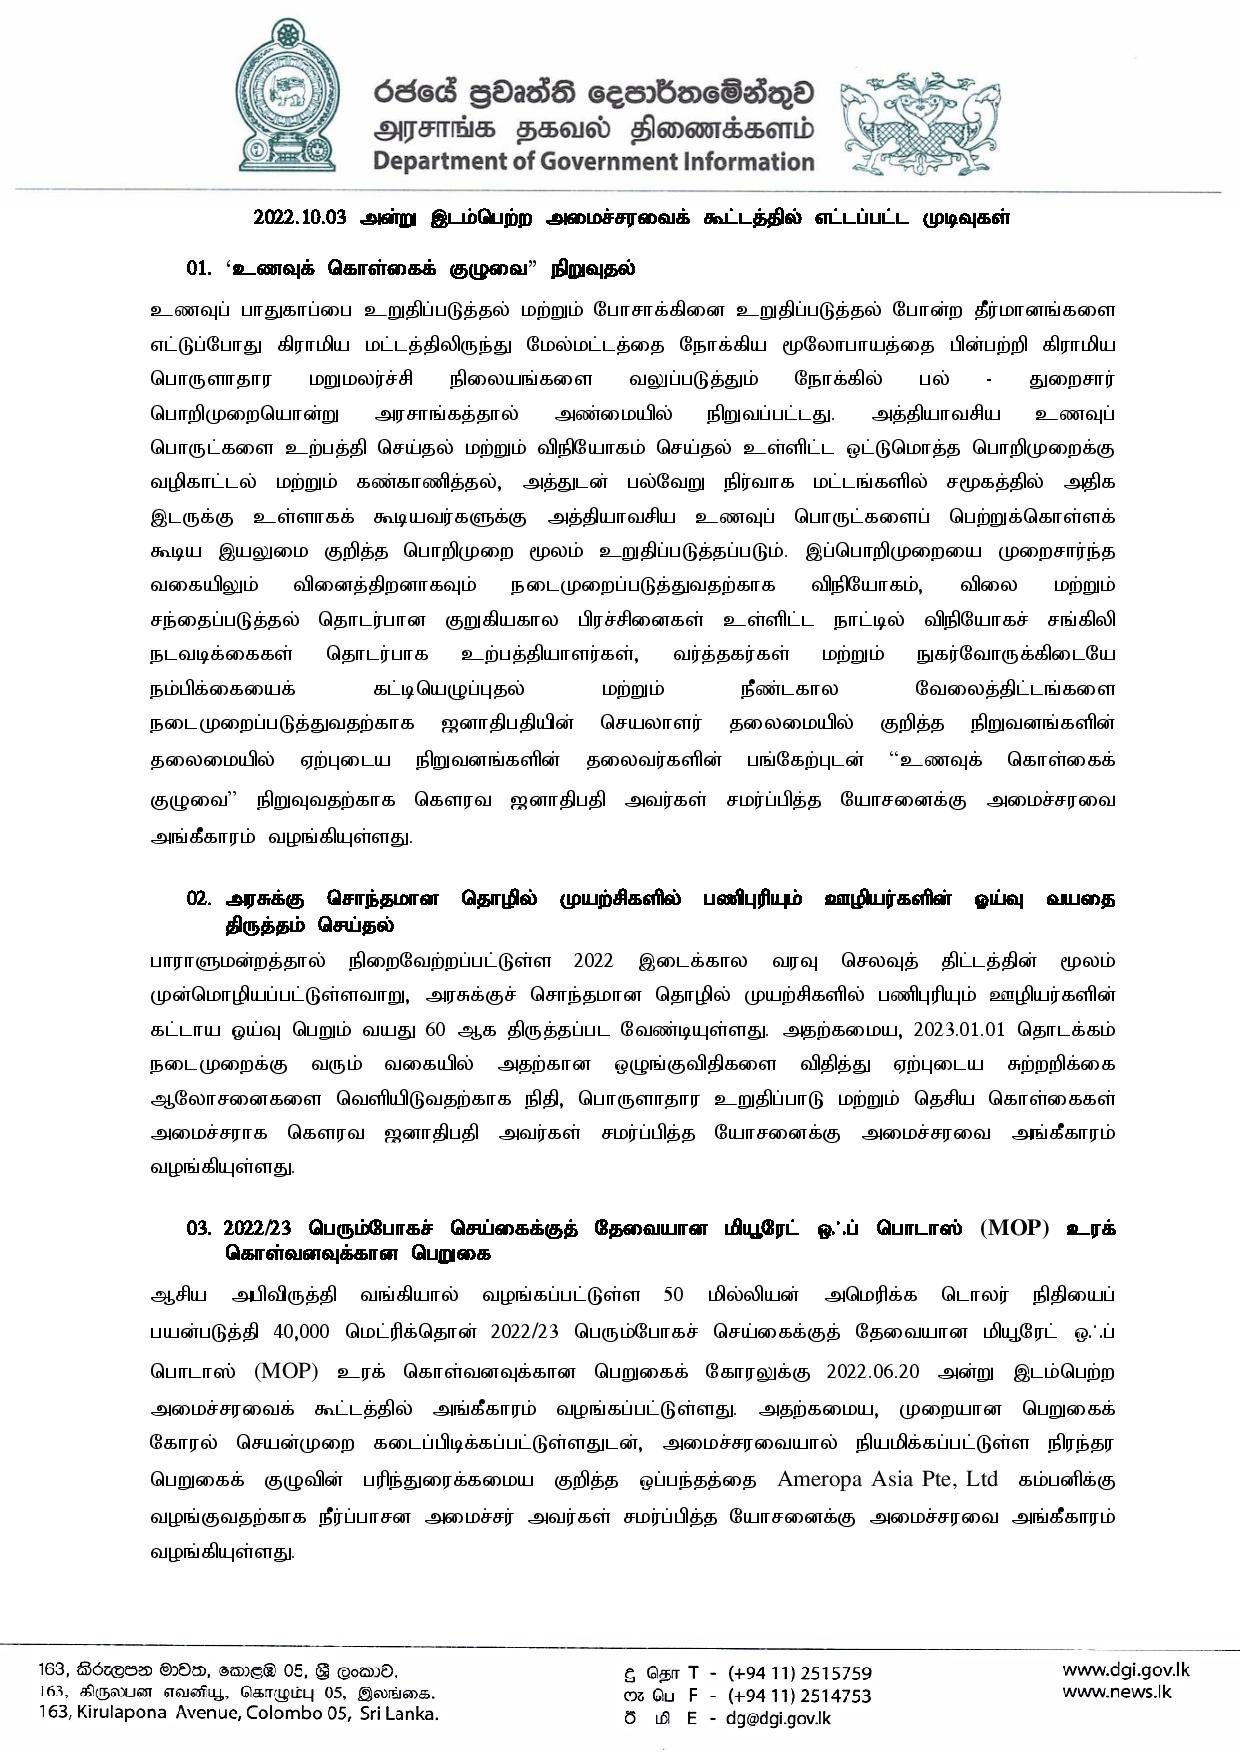 Cabinet Decisions on 03.10.2022 Tamil page 001